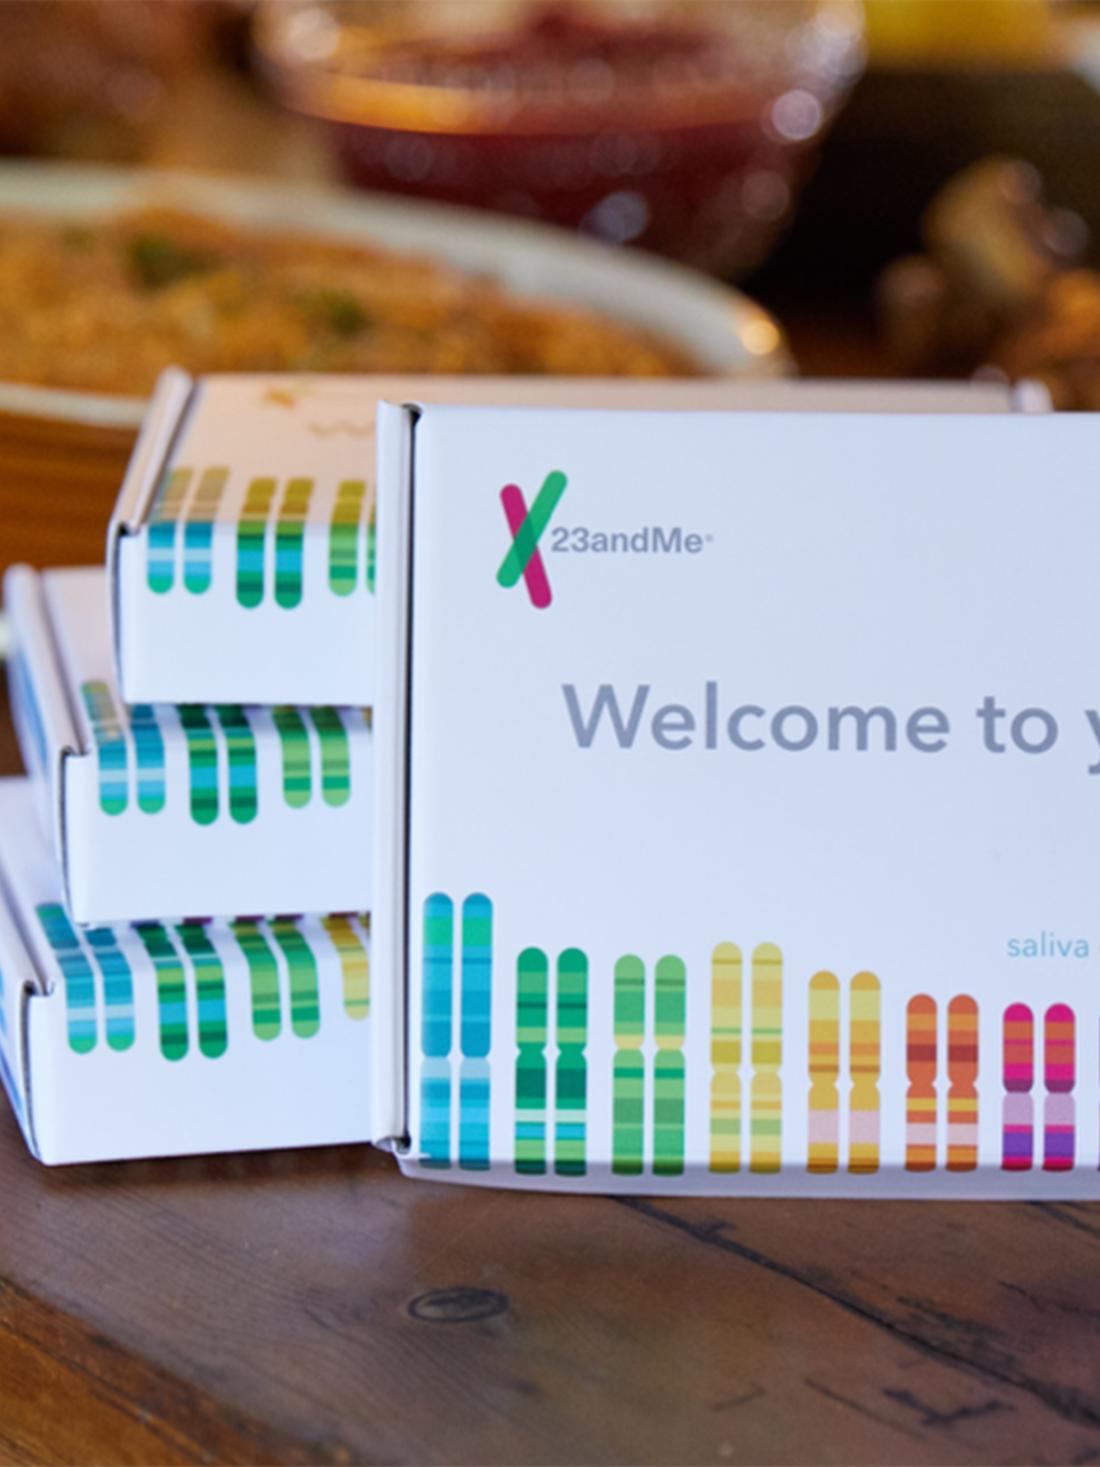 23andMe is making every day feel like Black Friday